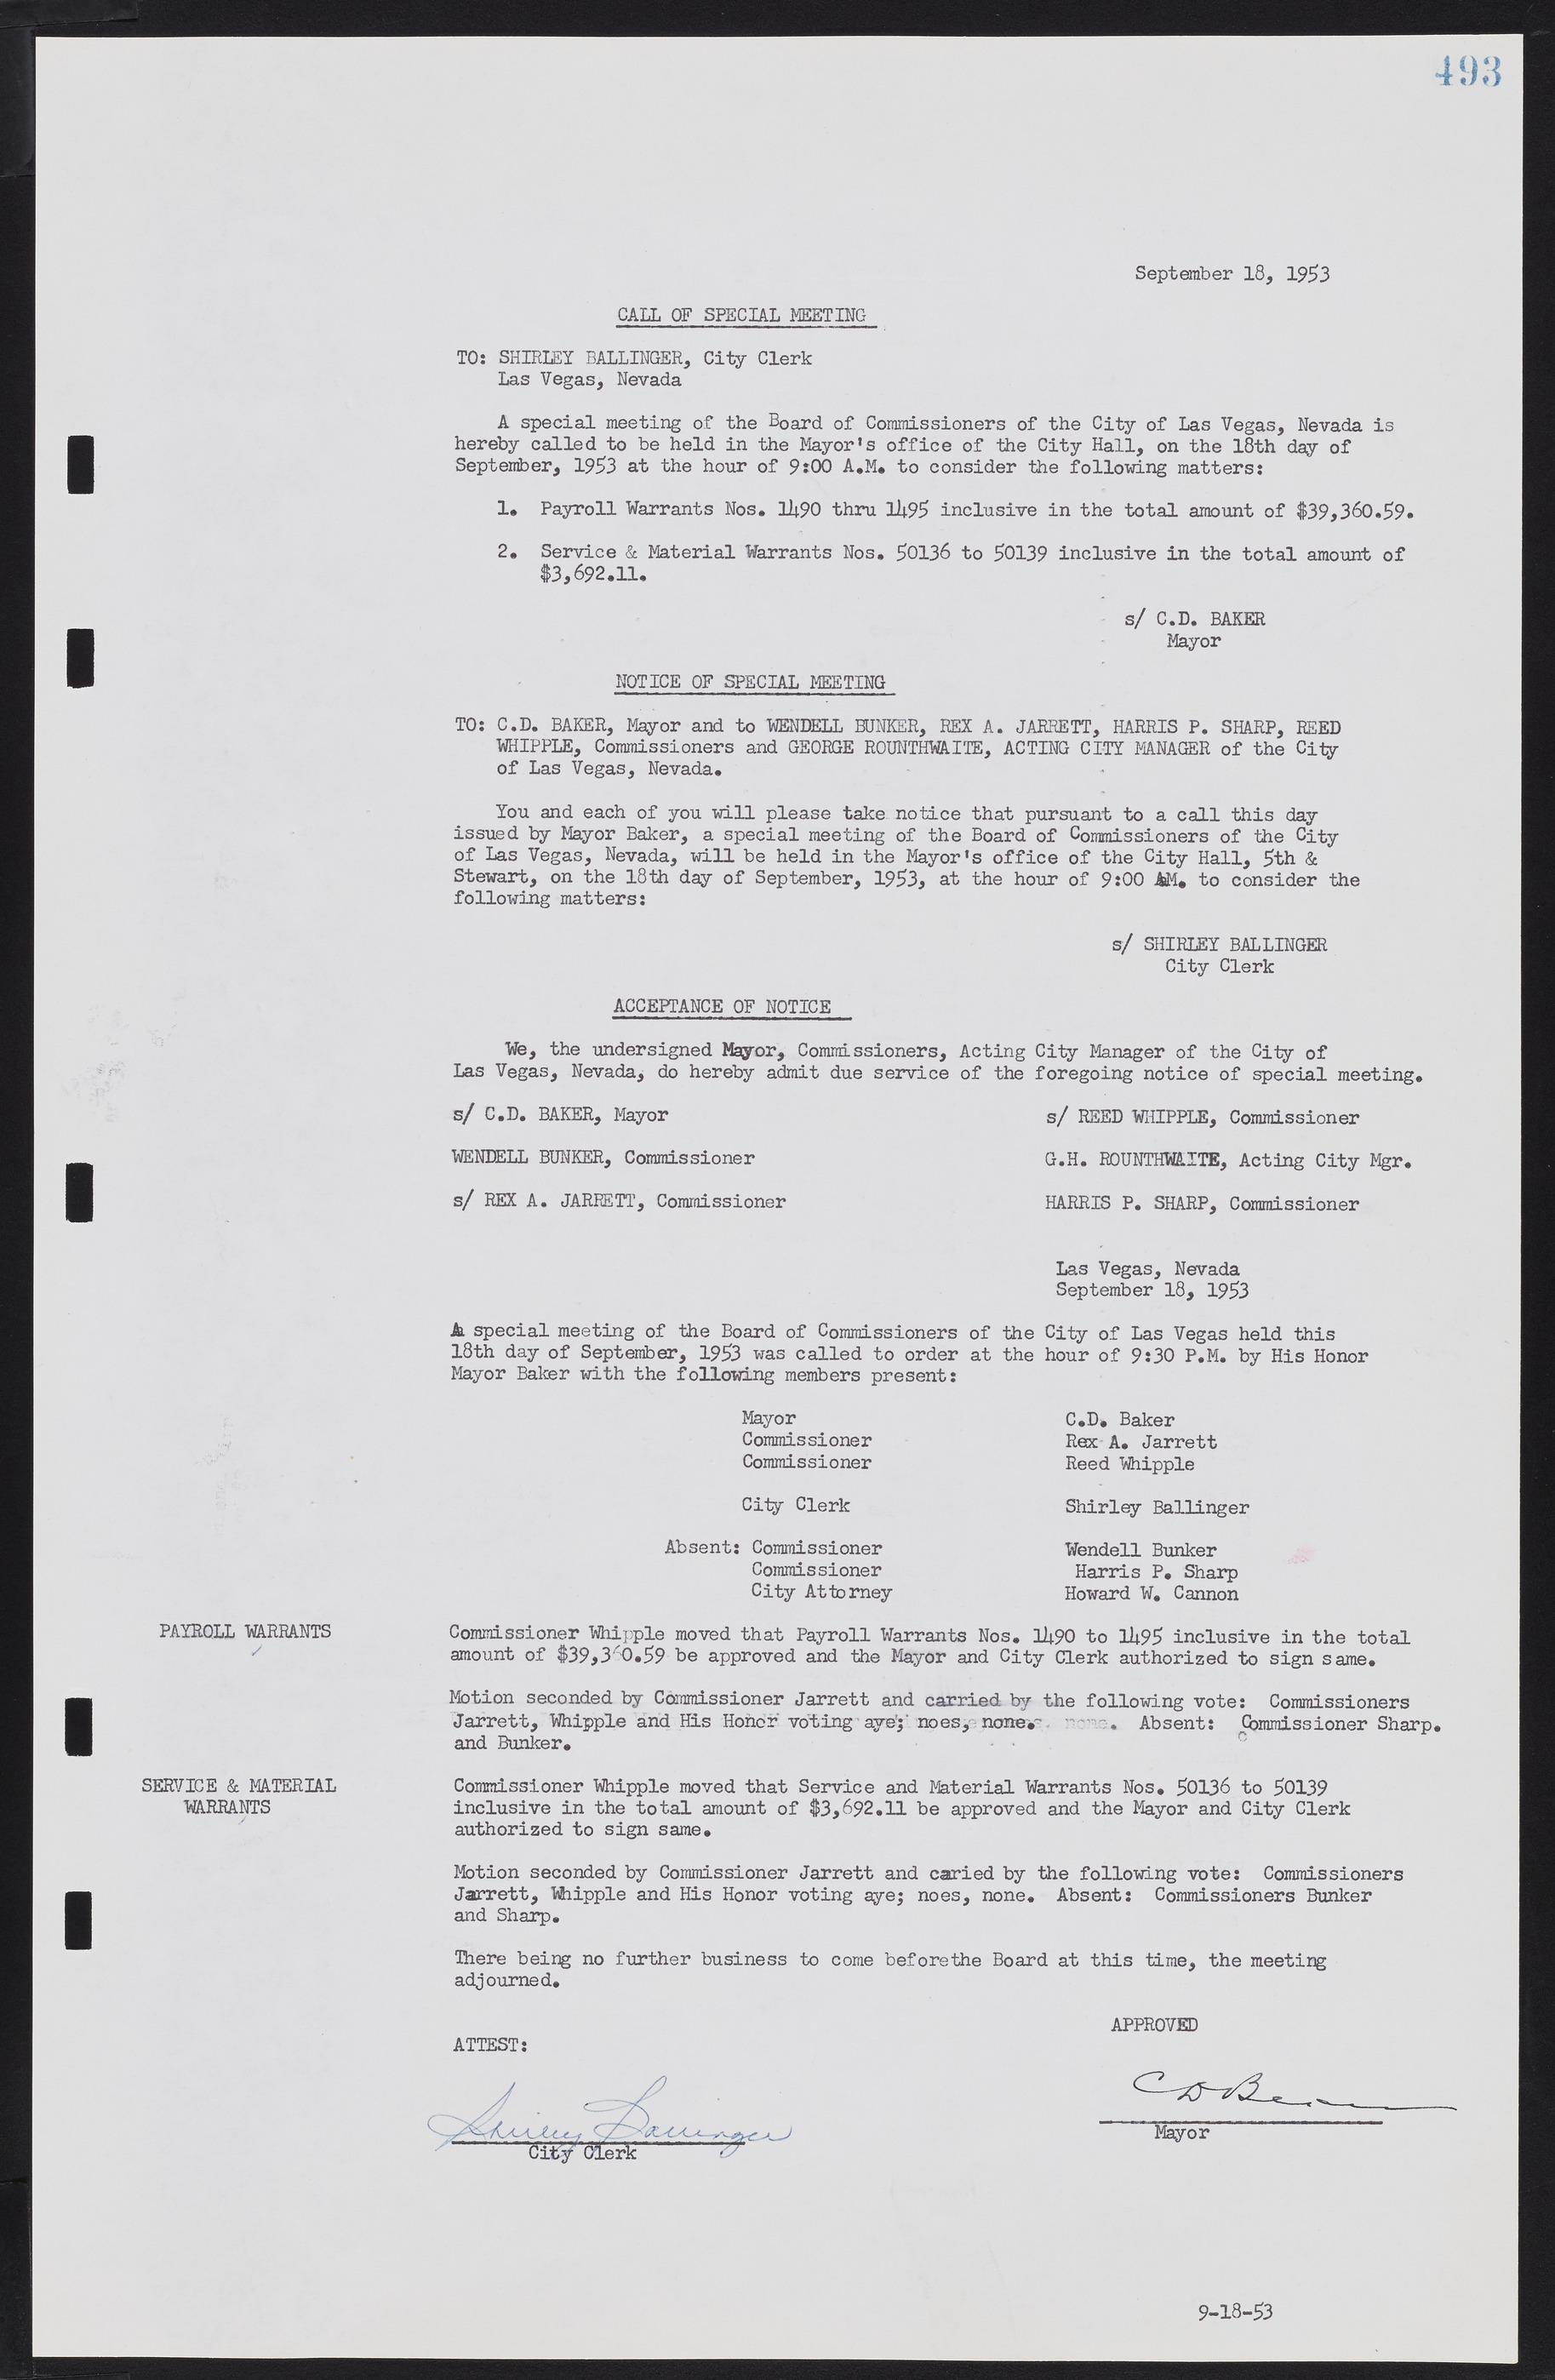 Las Vegas City Commission Minutes, May 26, 1952 to February 17, 1954, lvc000008-523